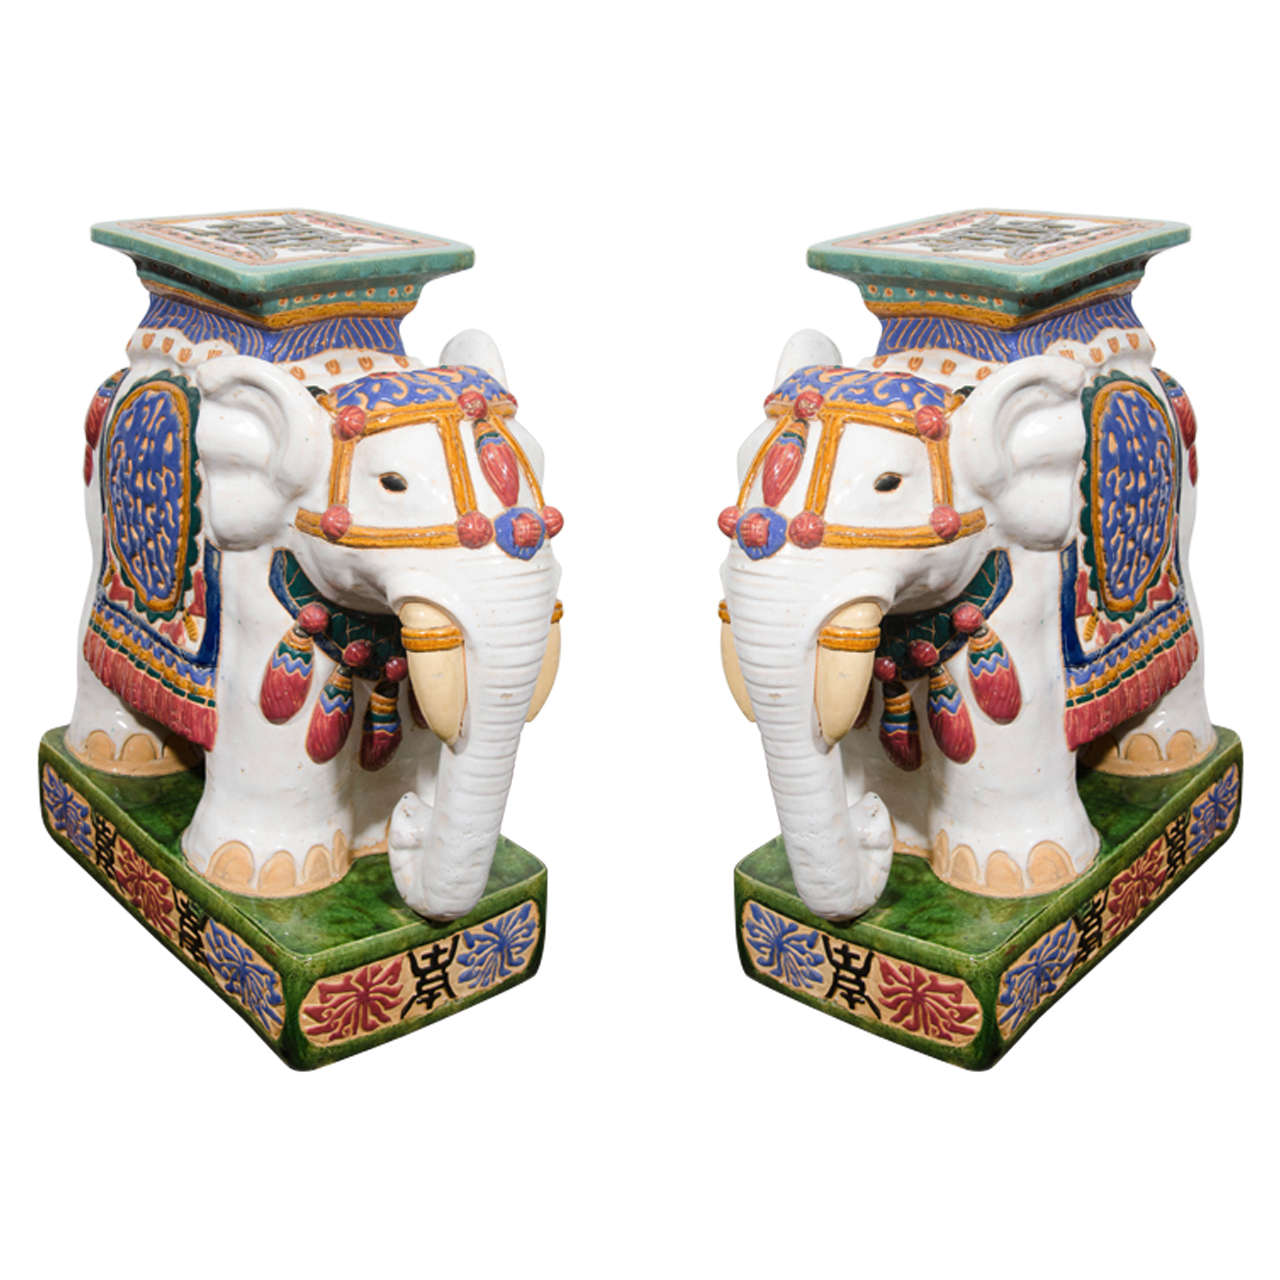 Midcentury Pair of Colorful Asian Inspired Ceramic Elephant Garden Stools